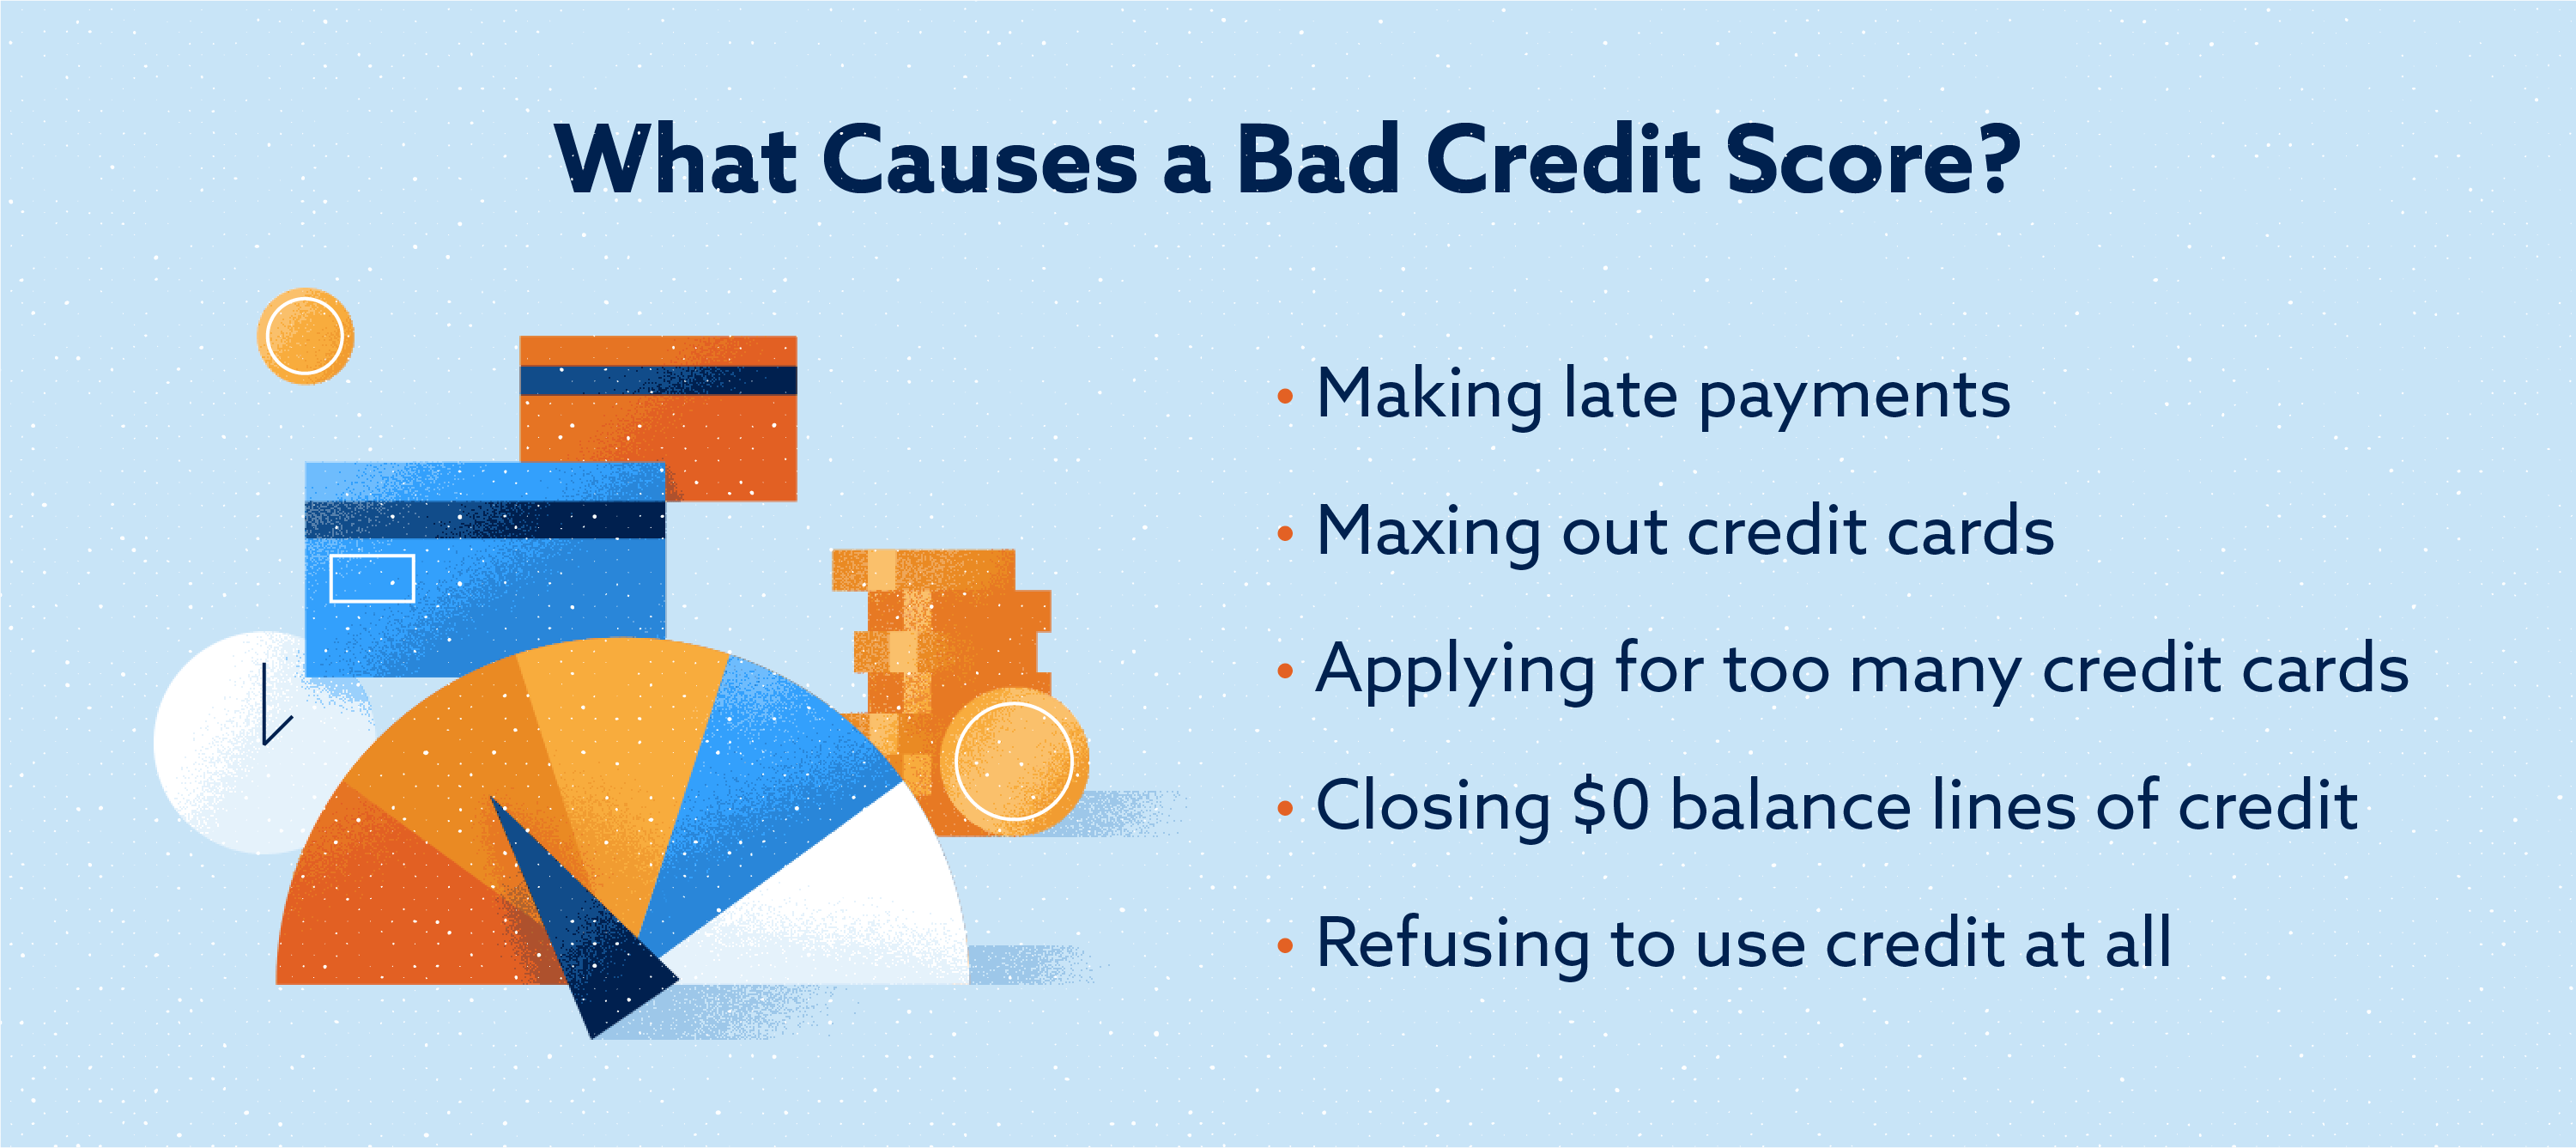 What gives you a bad credit score?